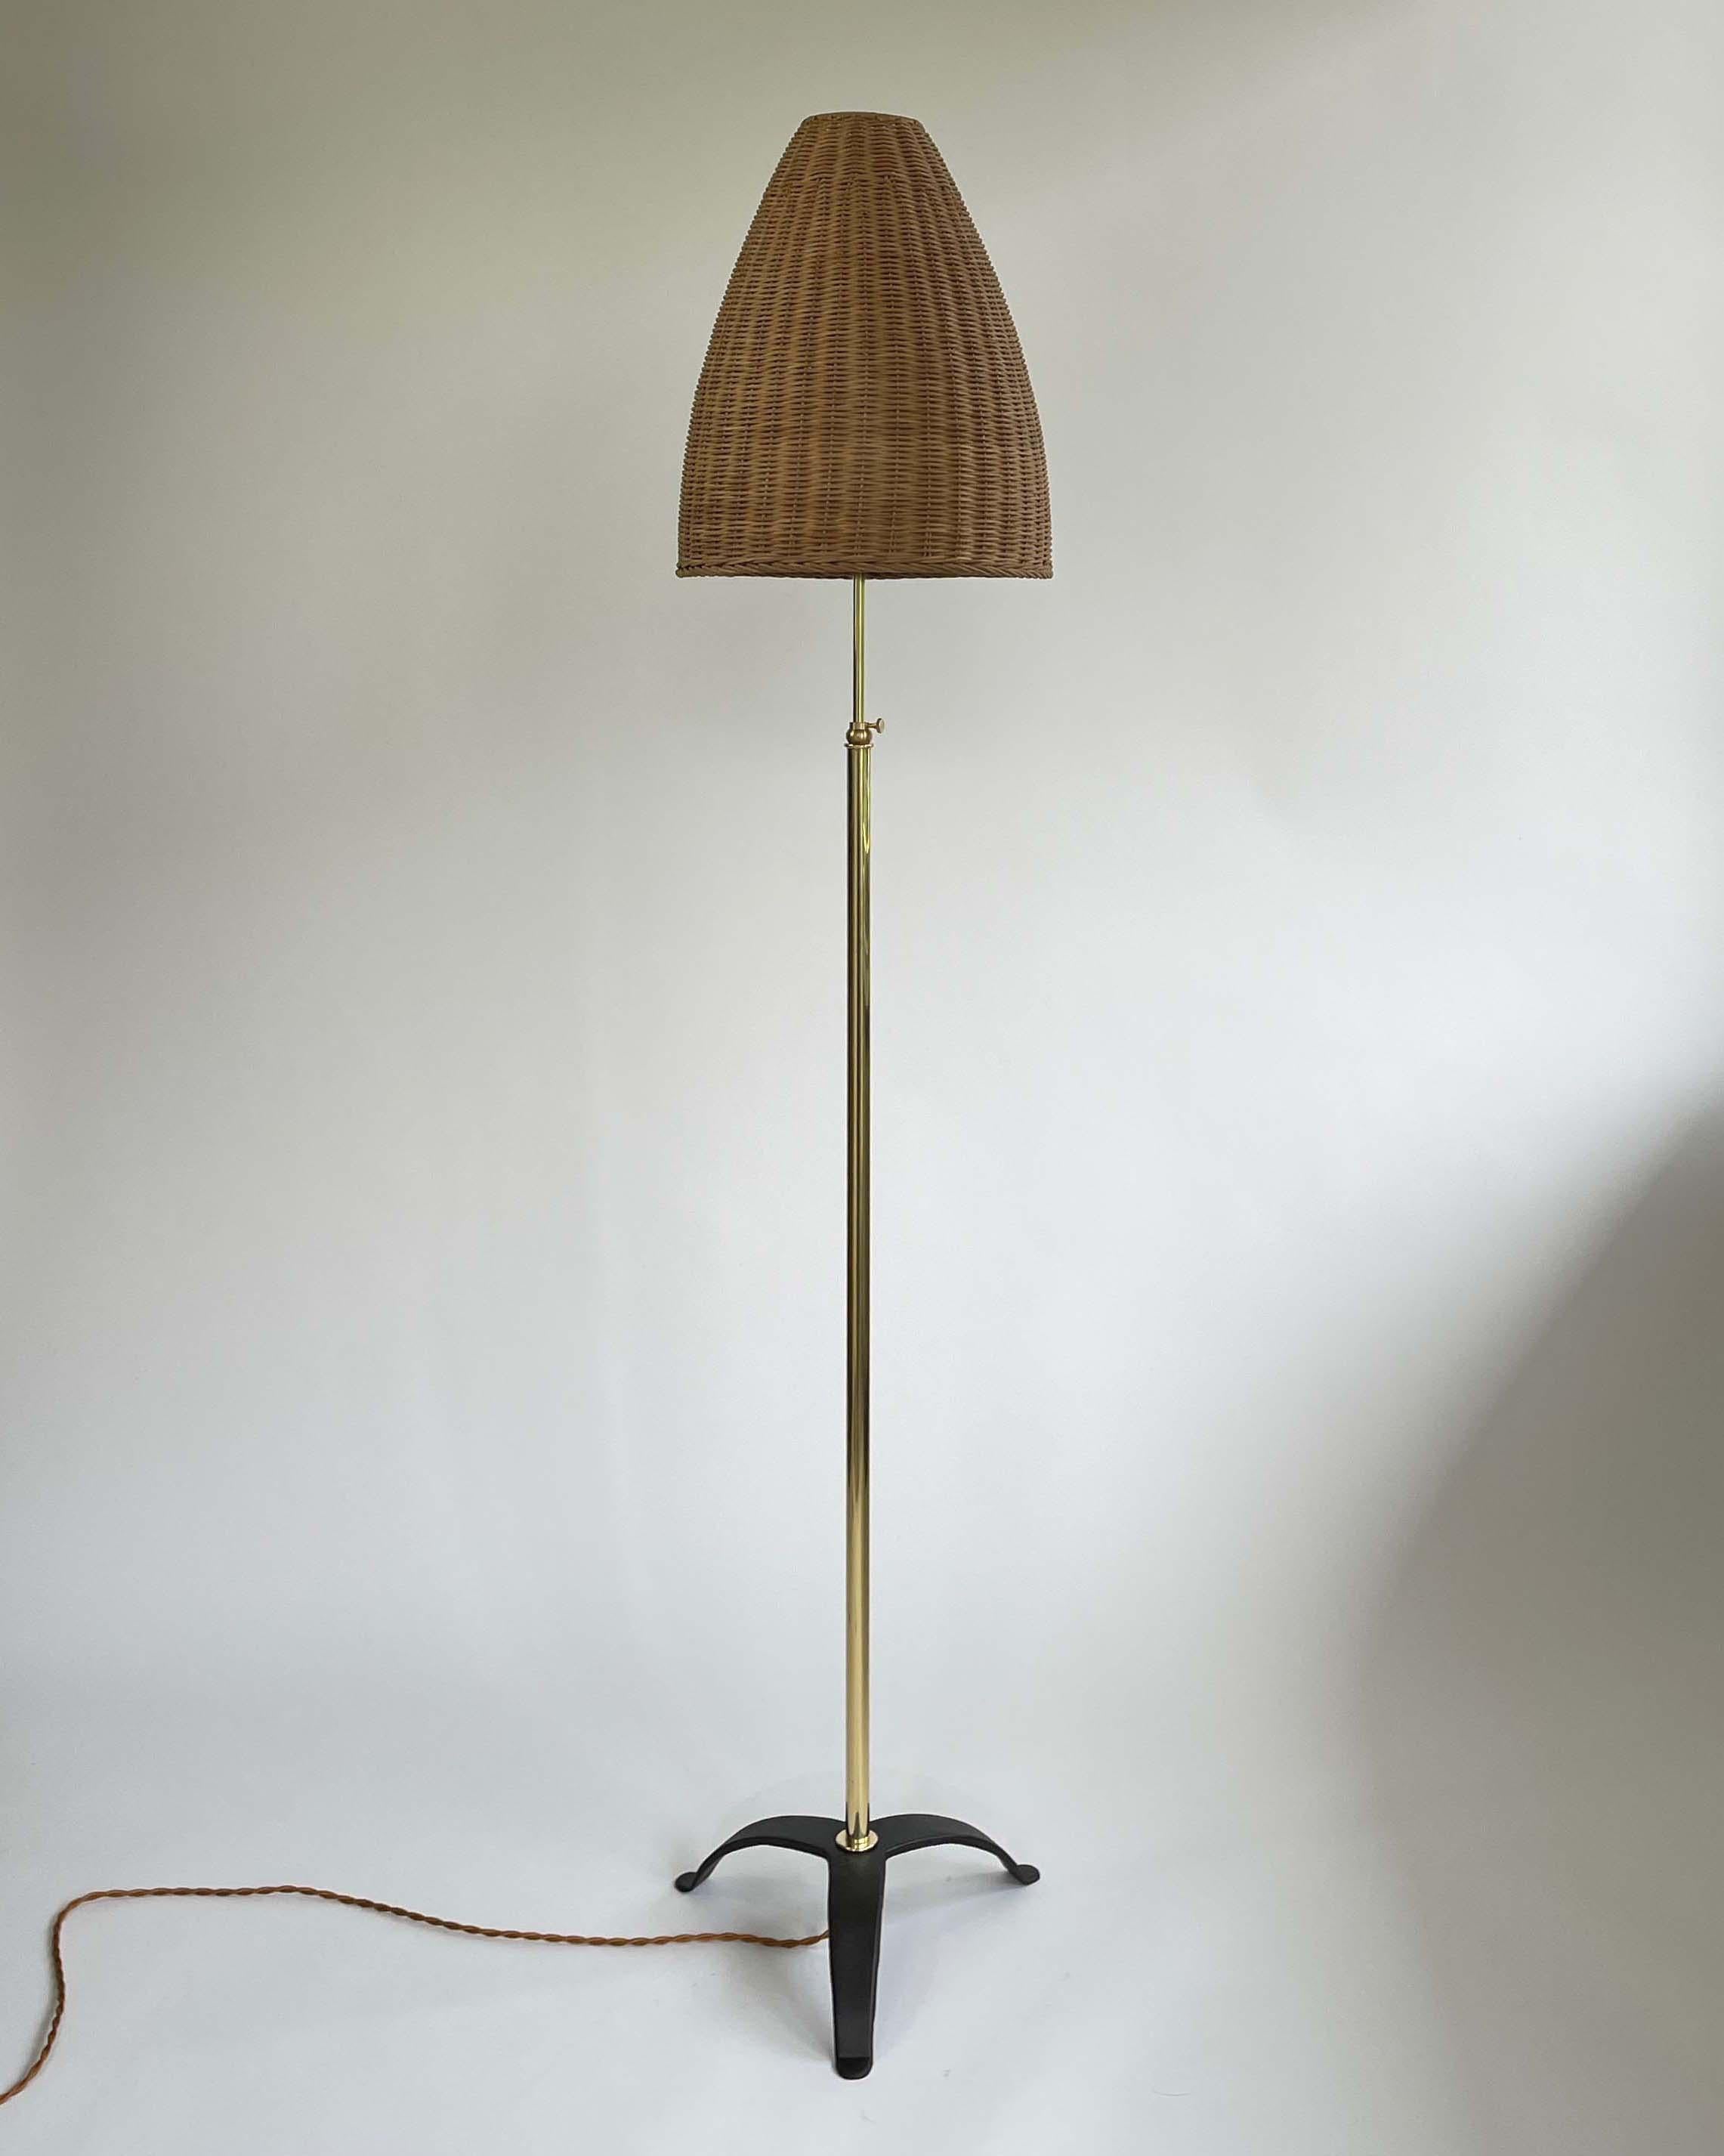 This unusual floor lamp was designed and manufactured in Austria in the 1960s. It features a beehive shaped rattan lampshade and a tripod brass base. 

The light is adjustable from 55.1